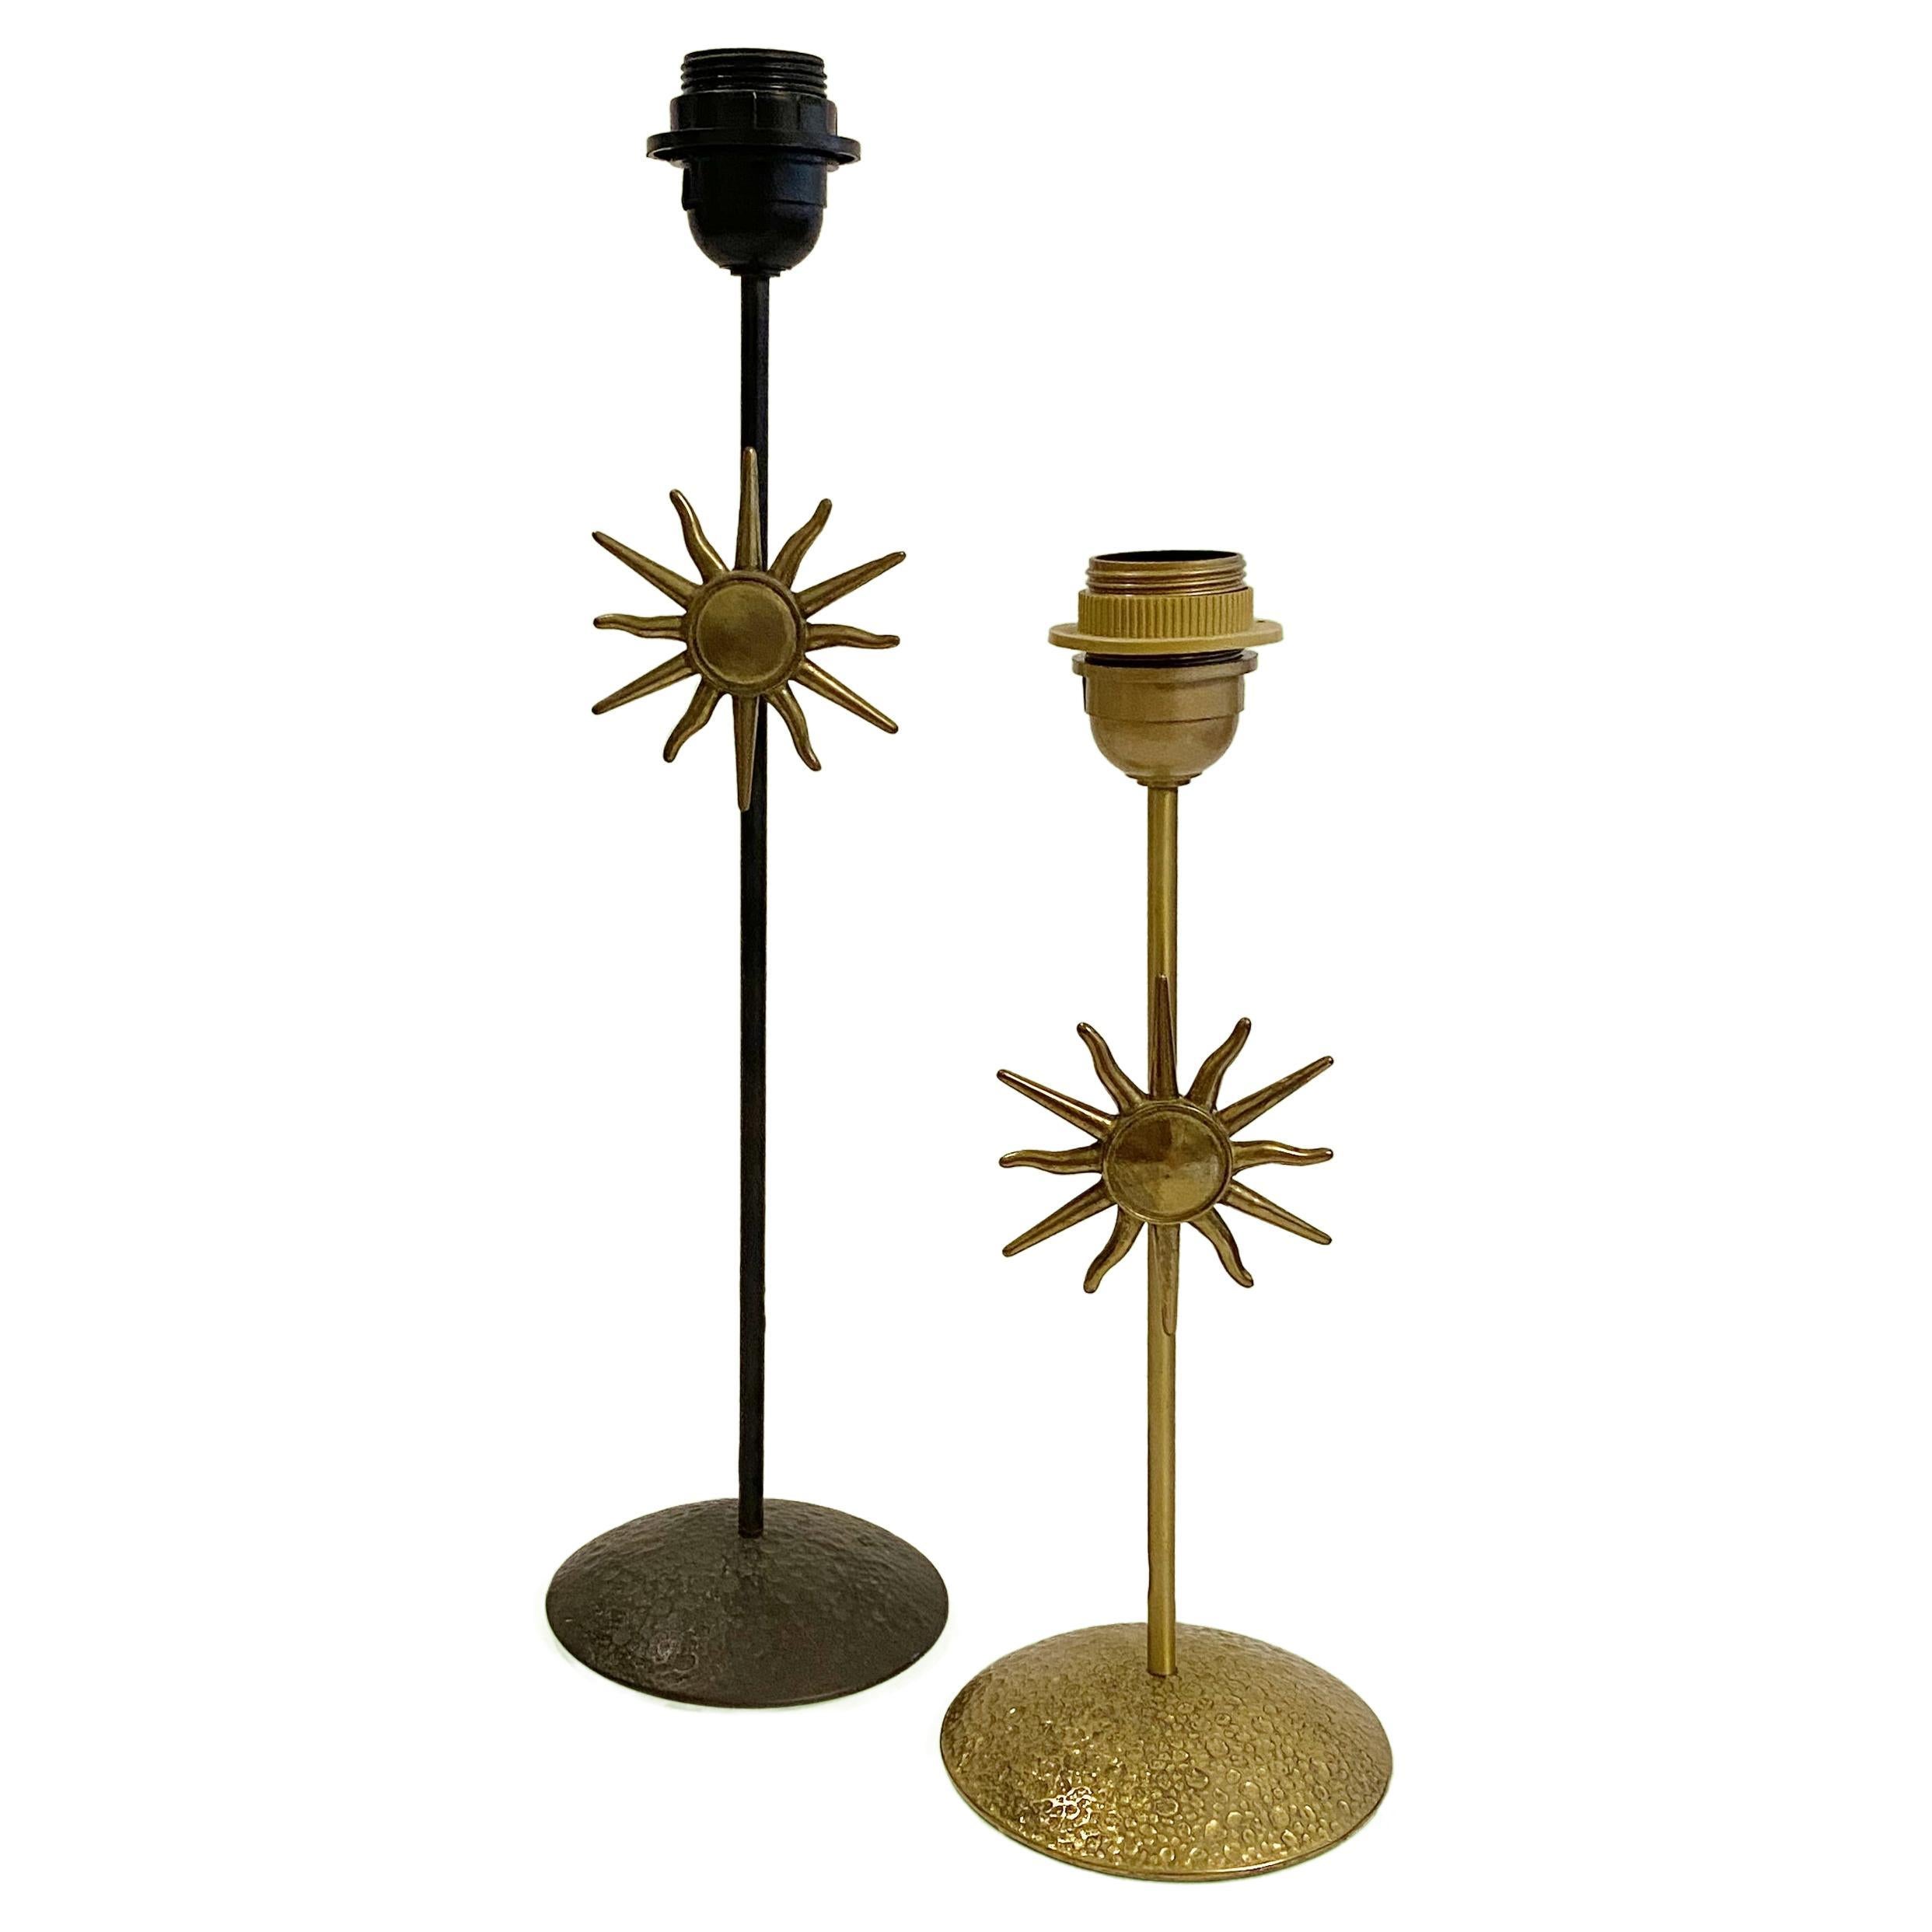 Sculptural Sun Brass Lamps in the Style of Fondica or Lucien Gau, France, 1990s